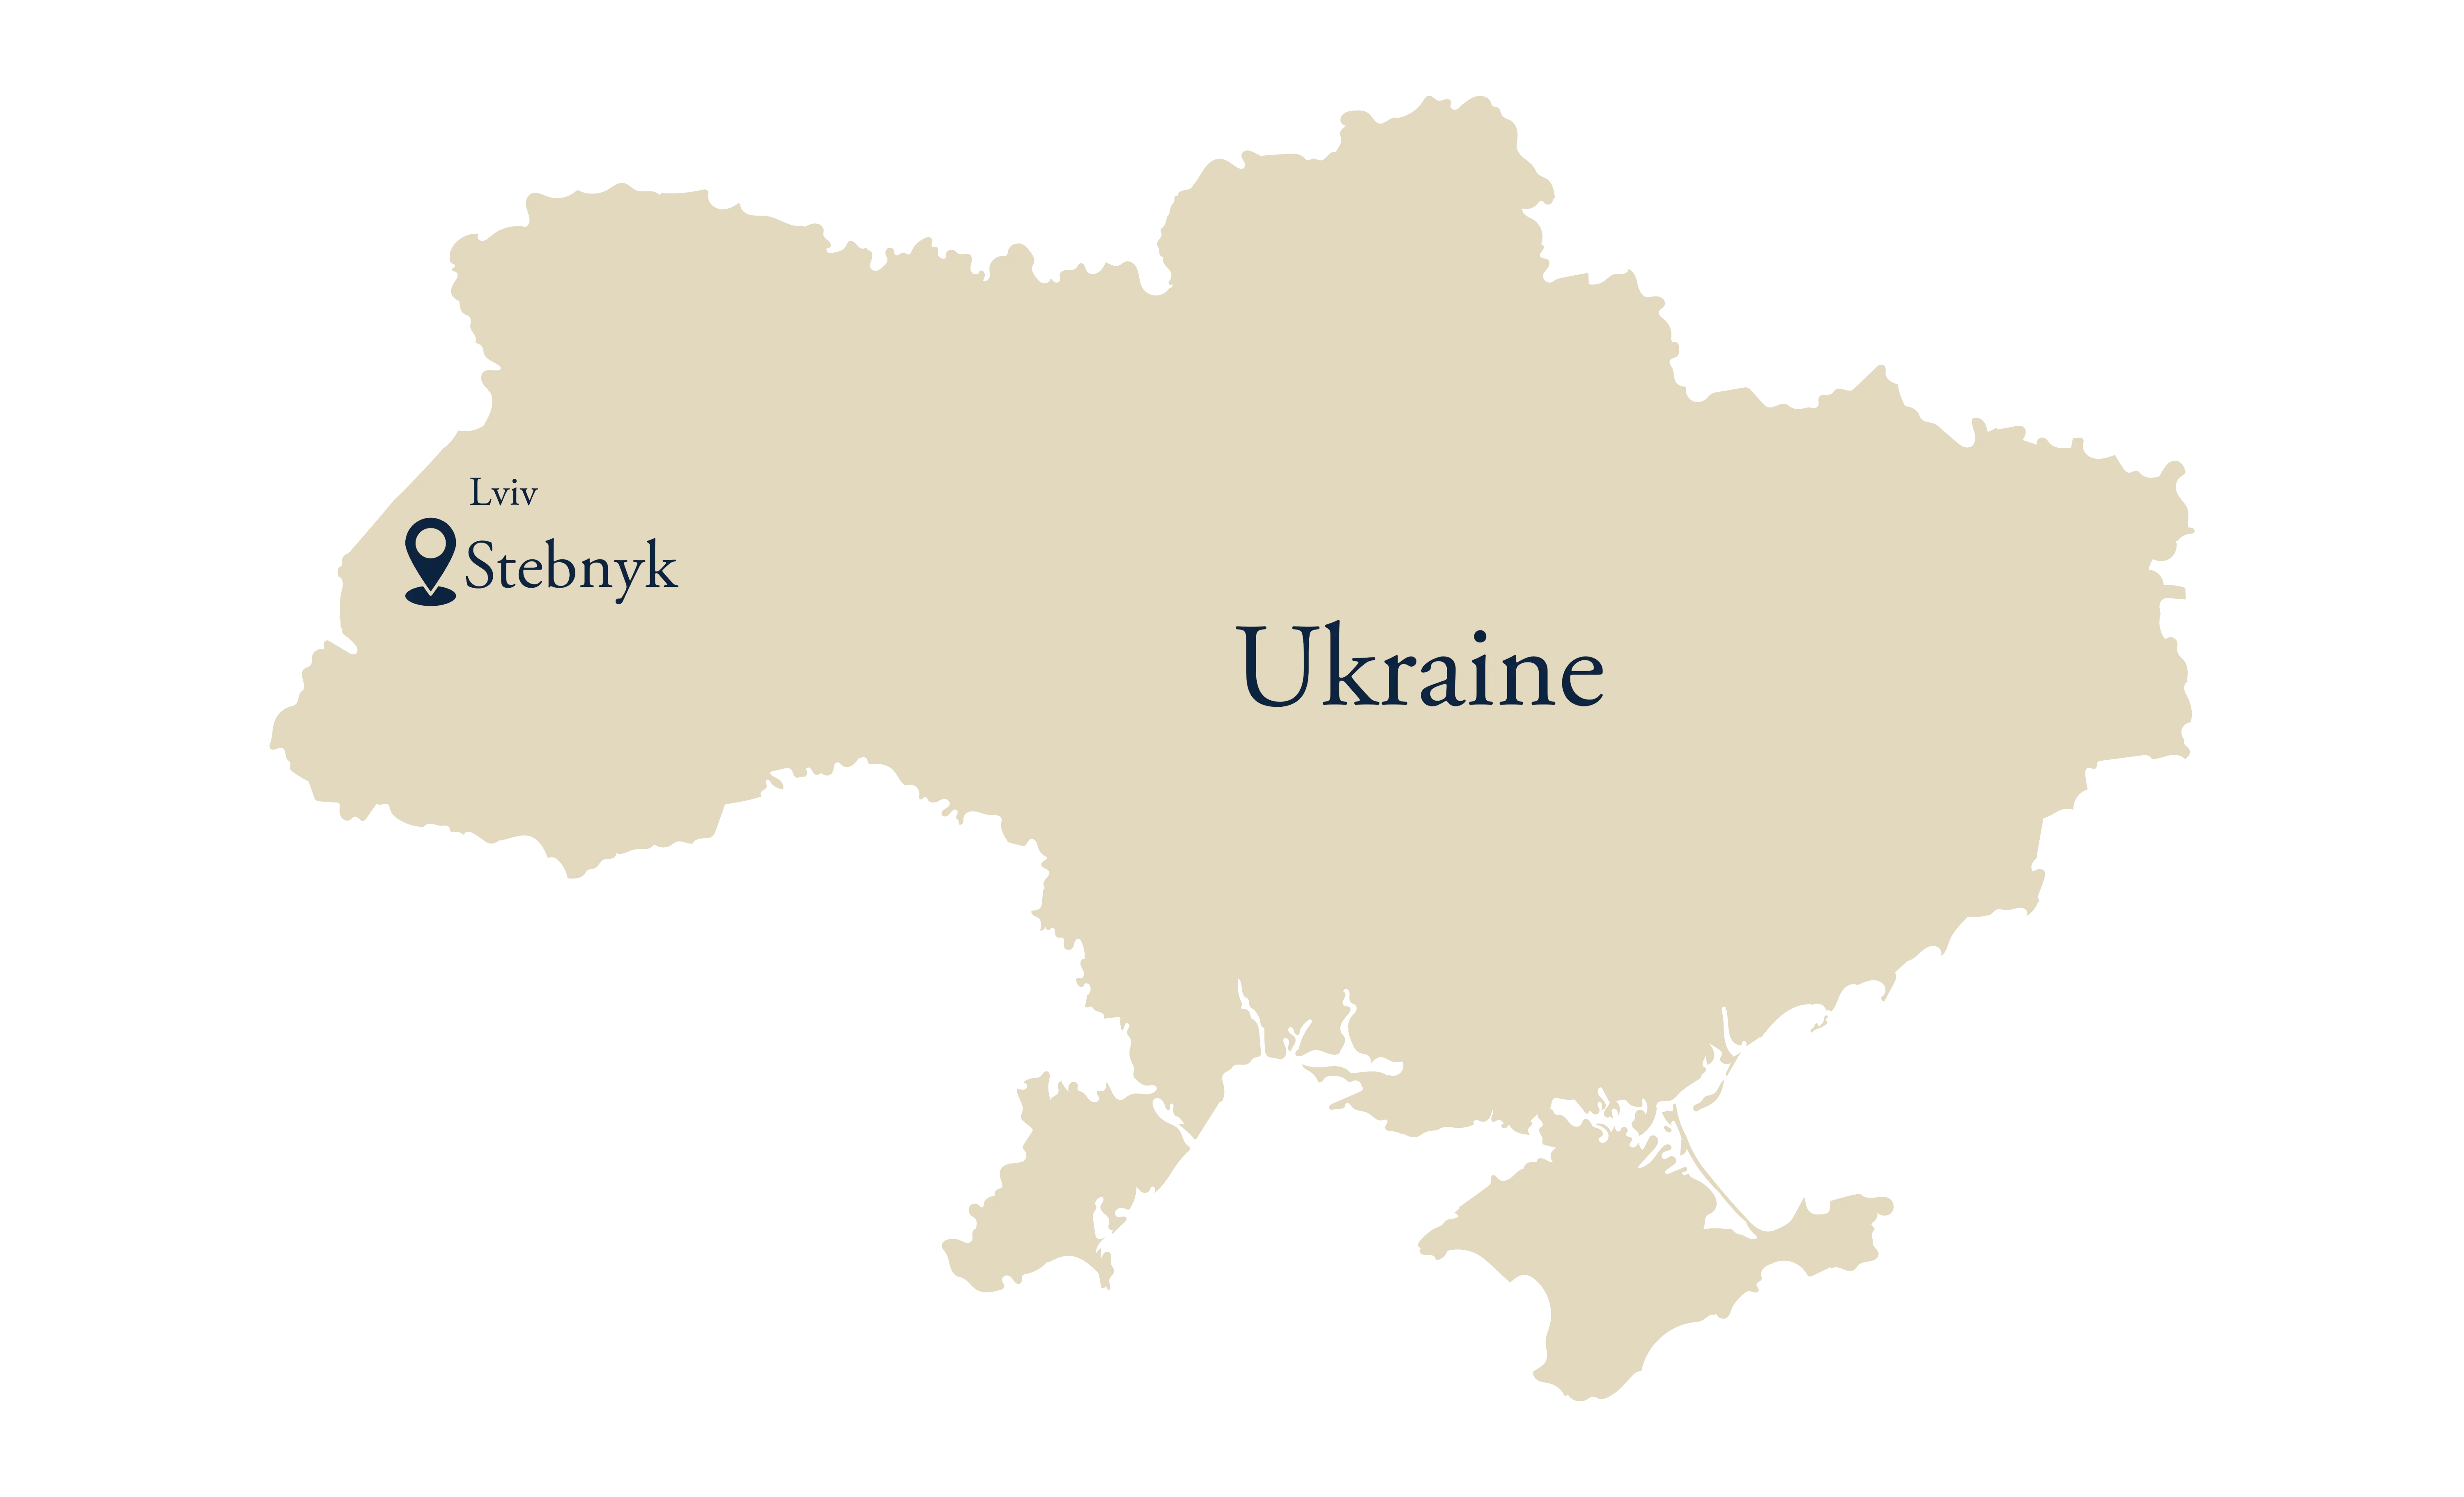 Outline of Ukraine with a placemark where Stebnyk is located.